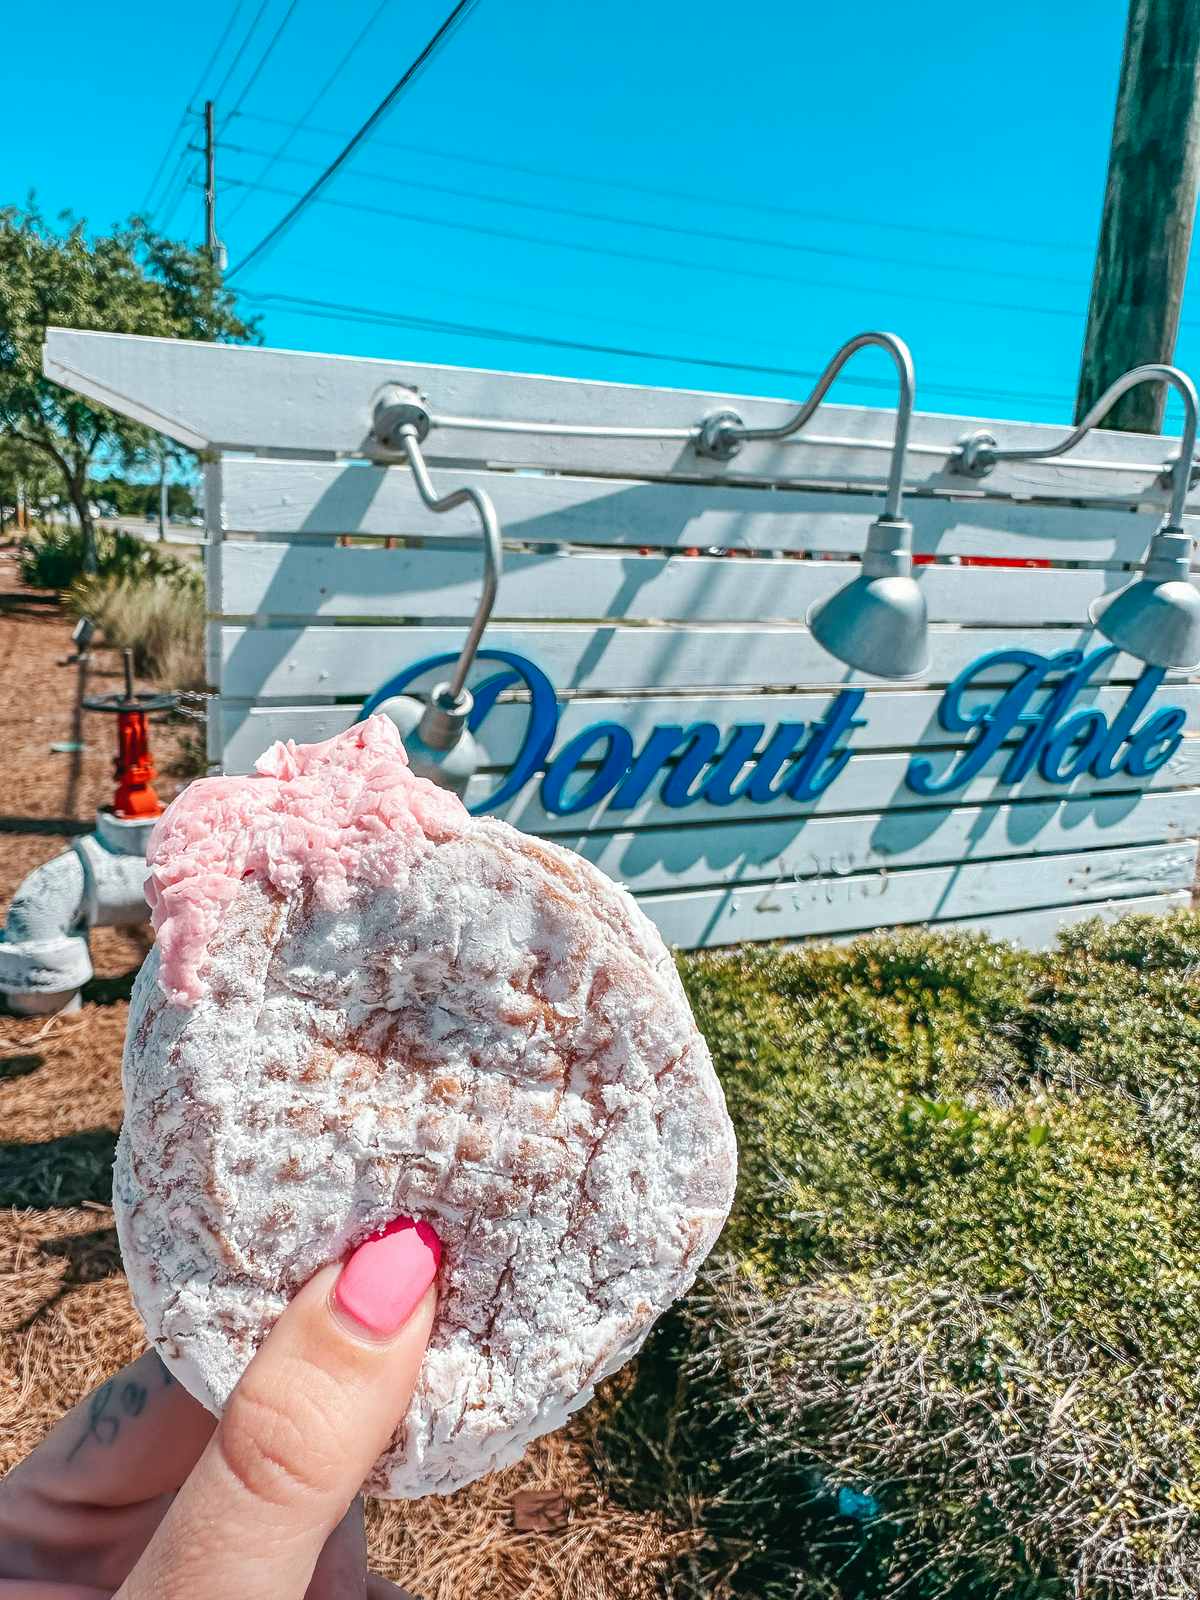 Buttercream filled donut from Donut Hole in 30A